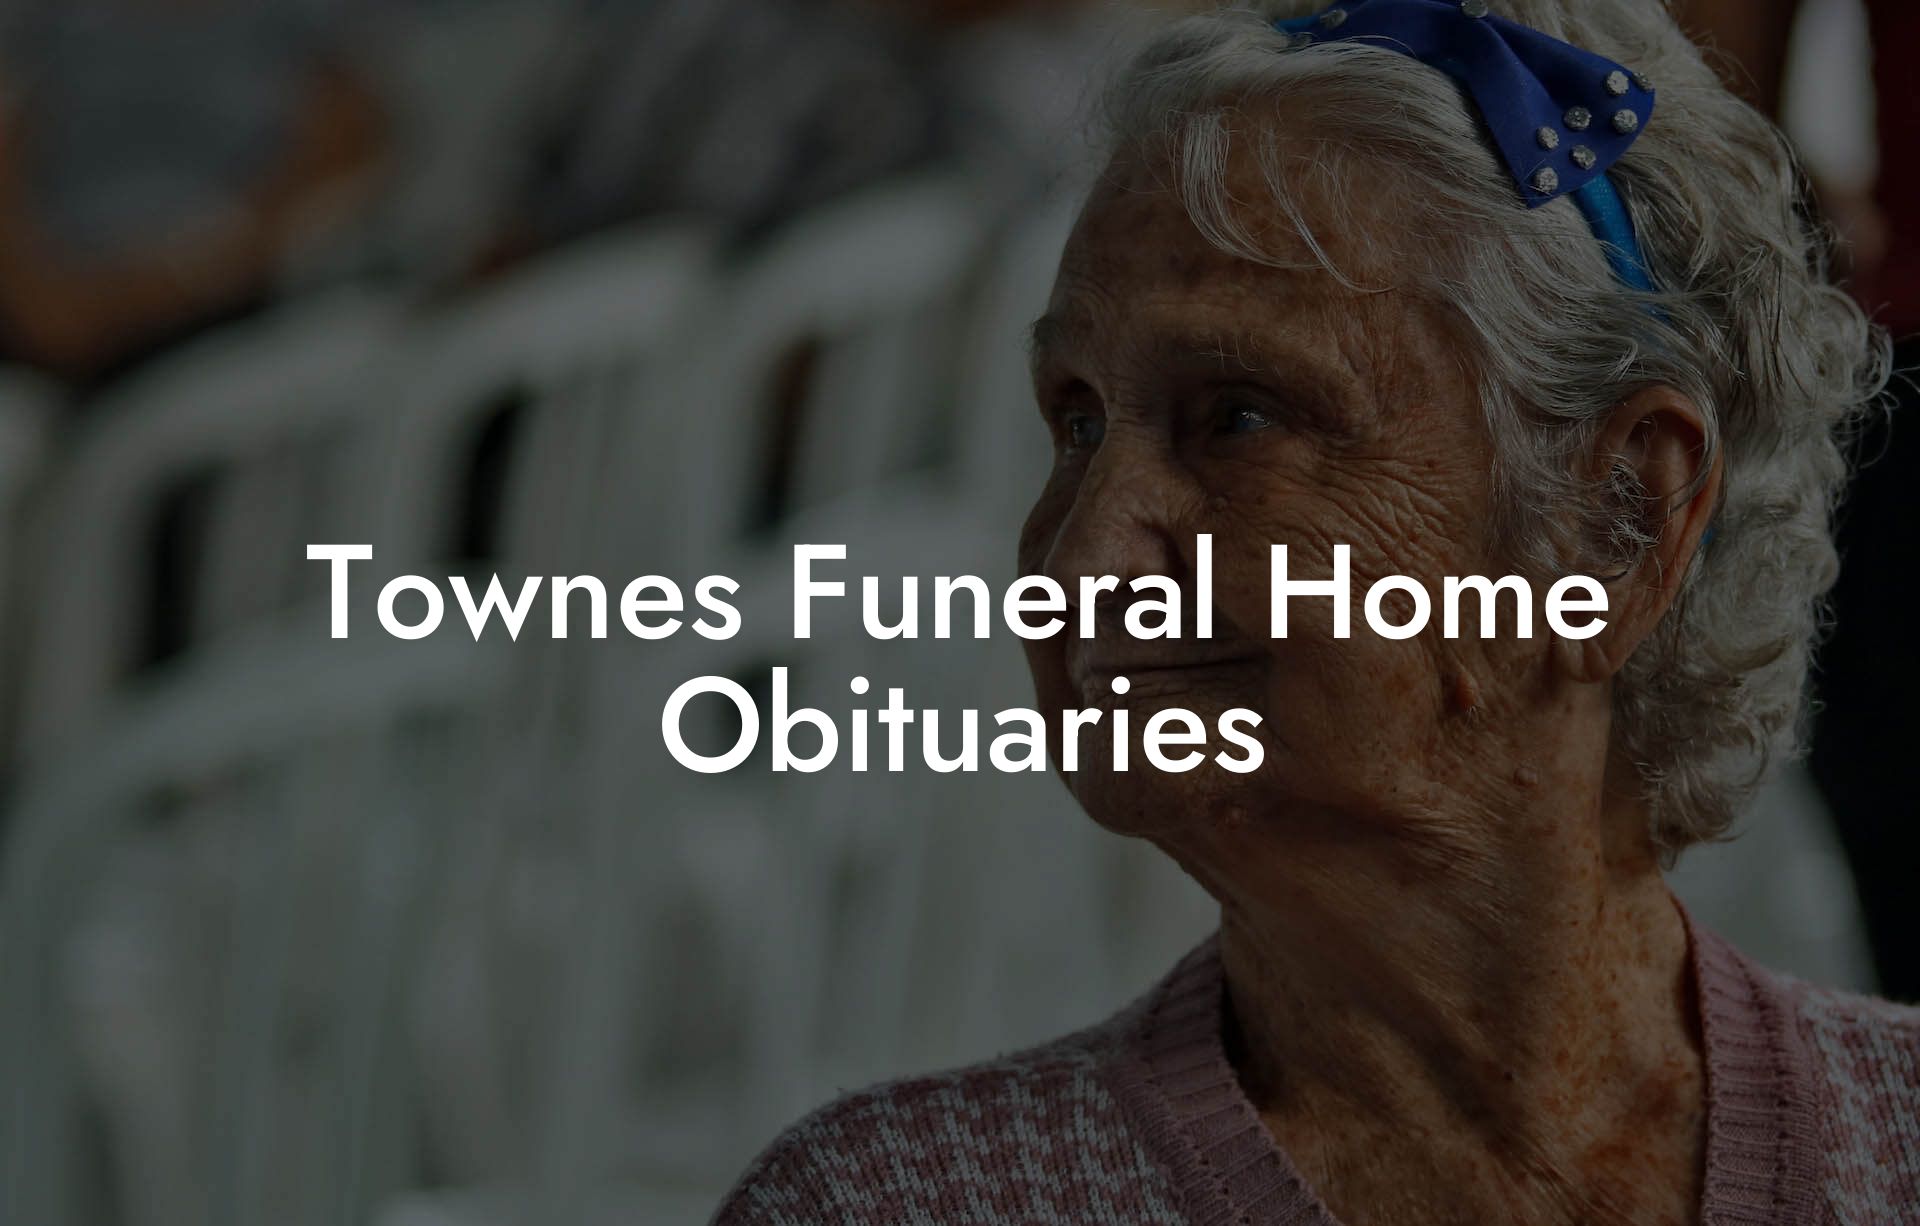 Townes Funeral Home Obituaries